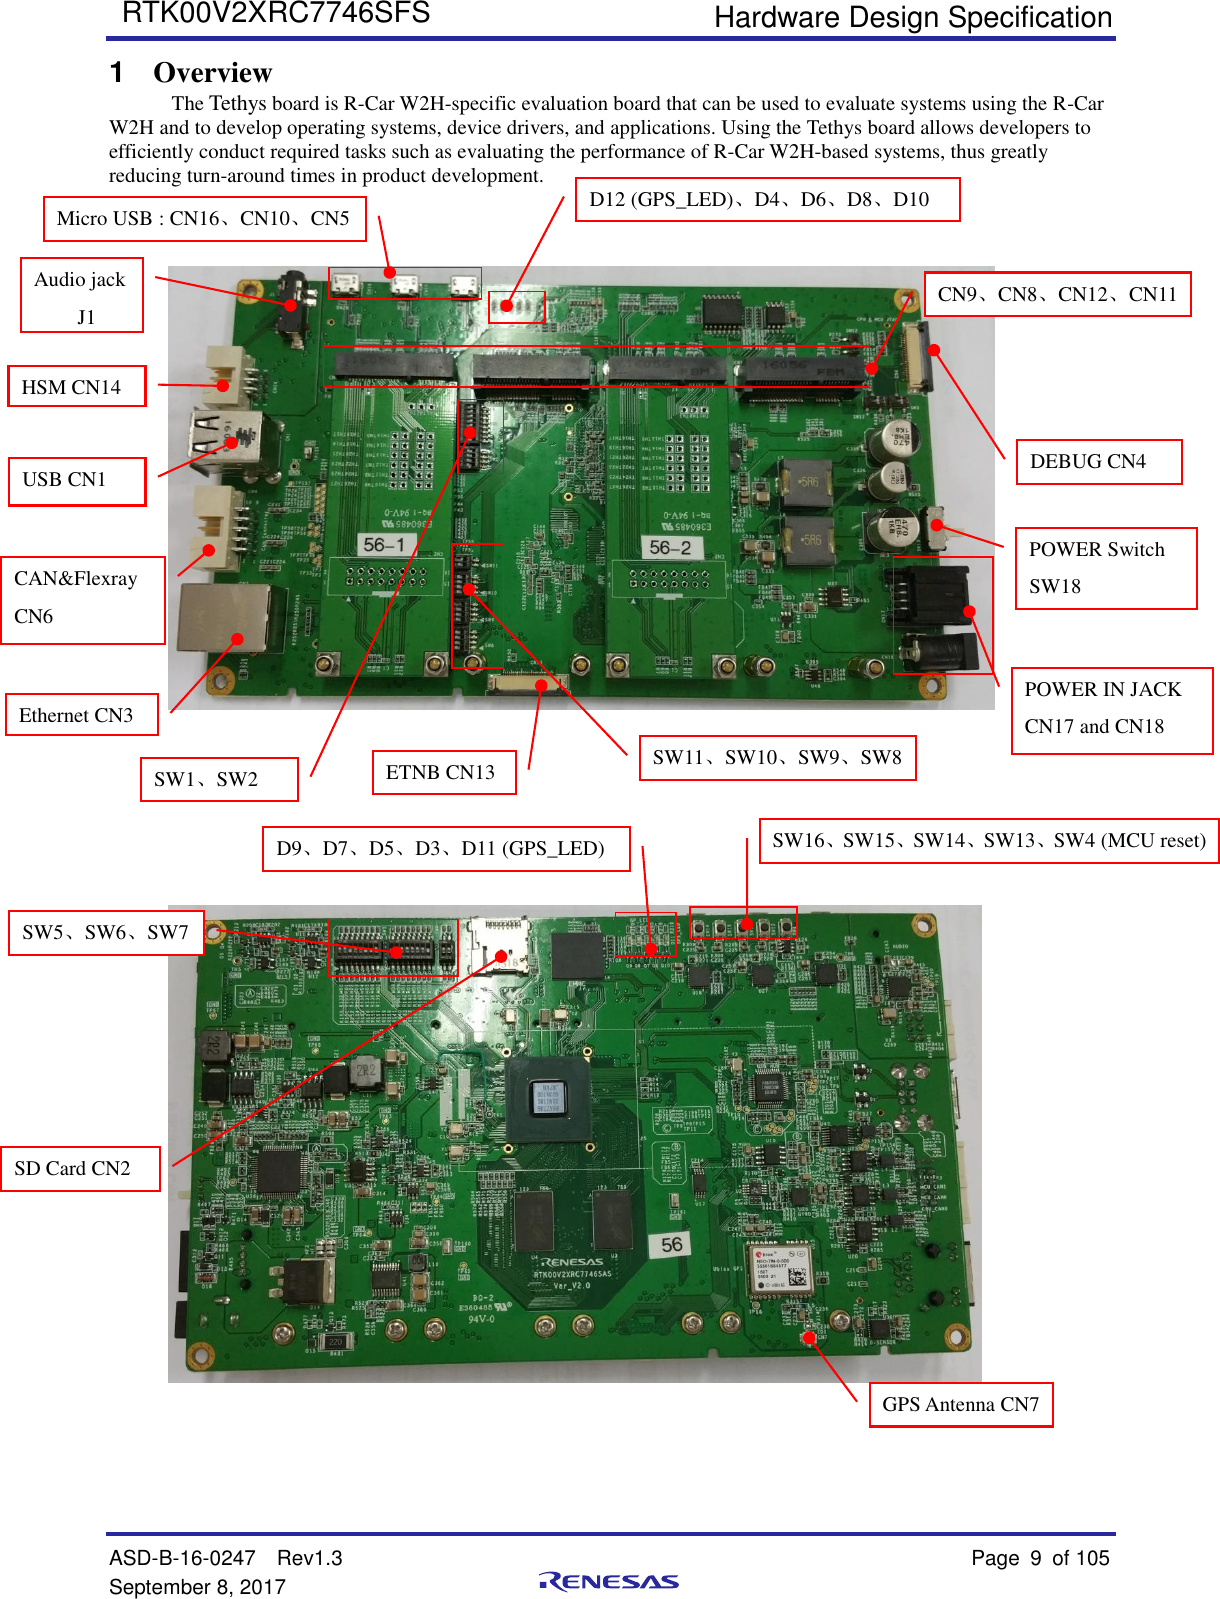   Hardware Design Specification ASD-B-16-0247  Rev1.3    Page 9  of 105 September 8, 2017     RTK00V2XRC7746SFS  1  Overview   The Tethys board is R-Car W2H-specific evaluation board that can be used to evaluate systems using the R-Car W2H and to develop operating systems, device drivers, and applications. Using the Tethys board allows developers to efficiently conduct required tasks such as evaluating the performance of R-Car W2H-based systems, thus greatly reducing turn-around times in product development.          SD Card CN2 GPS Antenna CN7 HSM CN14 CAN&amp;Flexray CN6 Ethernet CN3 Audio jack  J1 USB CN1  DEBUG CN4 POWER Switch SW18 POWER IN JACK CN17 and CN18   Micro USB : CN16、CN10、CN5 ETNB CN13 D12 (GPS_LED)、D4、D6、D8、D10   CN9、CN8、CN12、CN11   SW1、SW2  SW11、SW10、SW9、SW8 SW16、SW15、SW14、SW13、SW4 (MCU reset)   D9、D7、D5、D3、D11 (GPS_LED)   SW5、SW6、SW7 